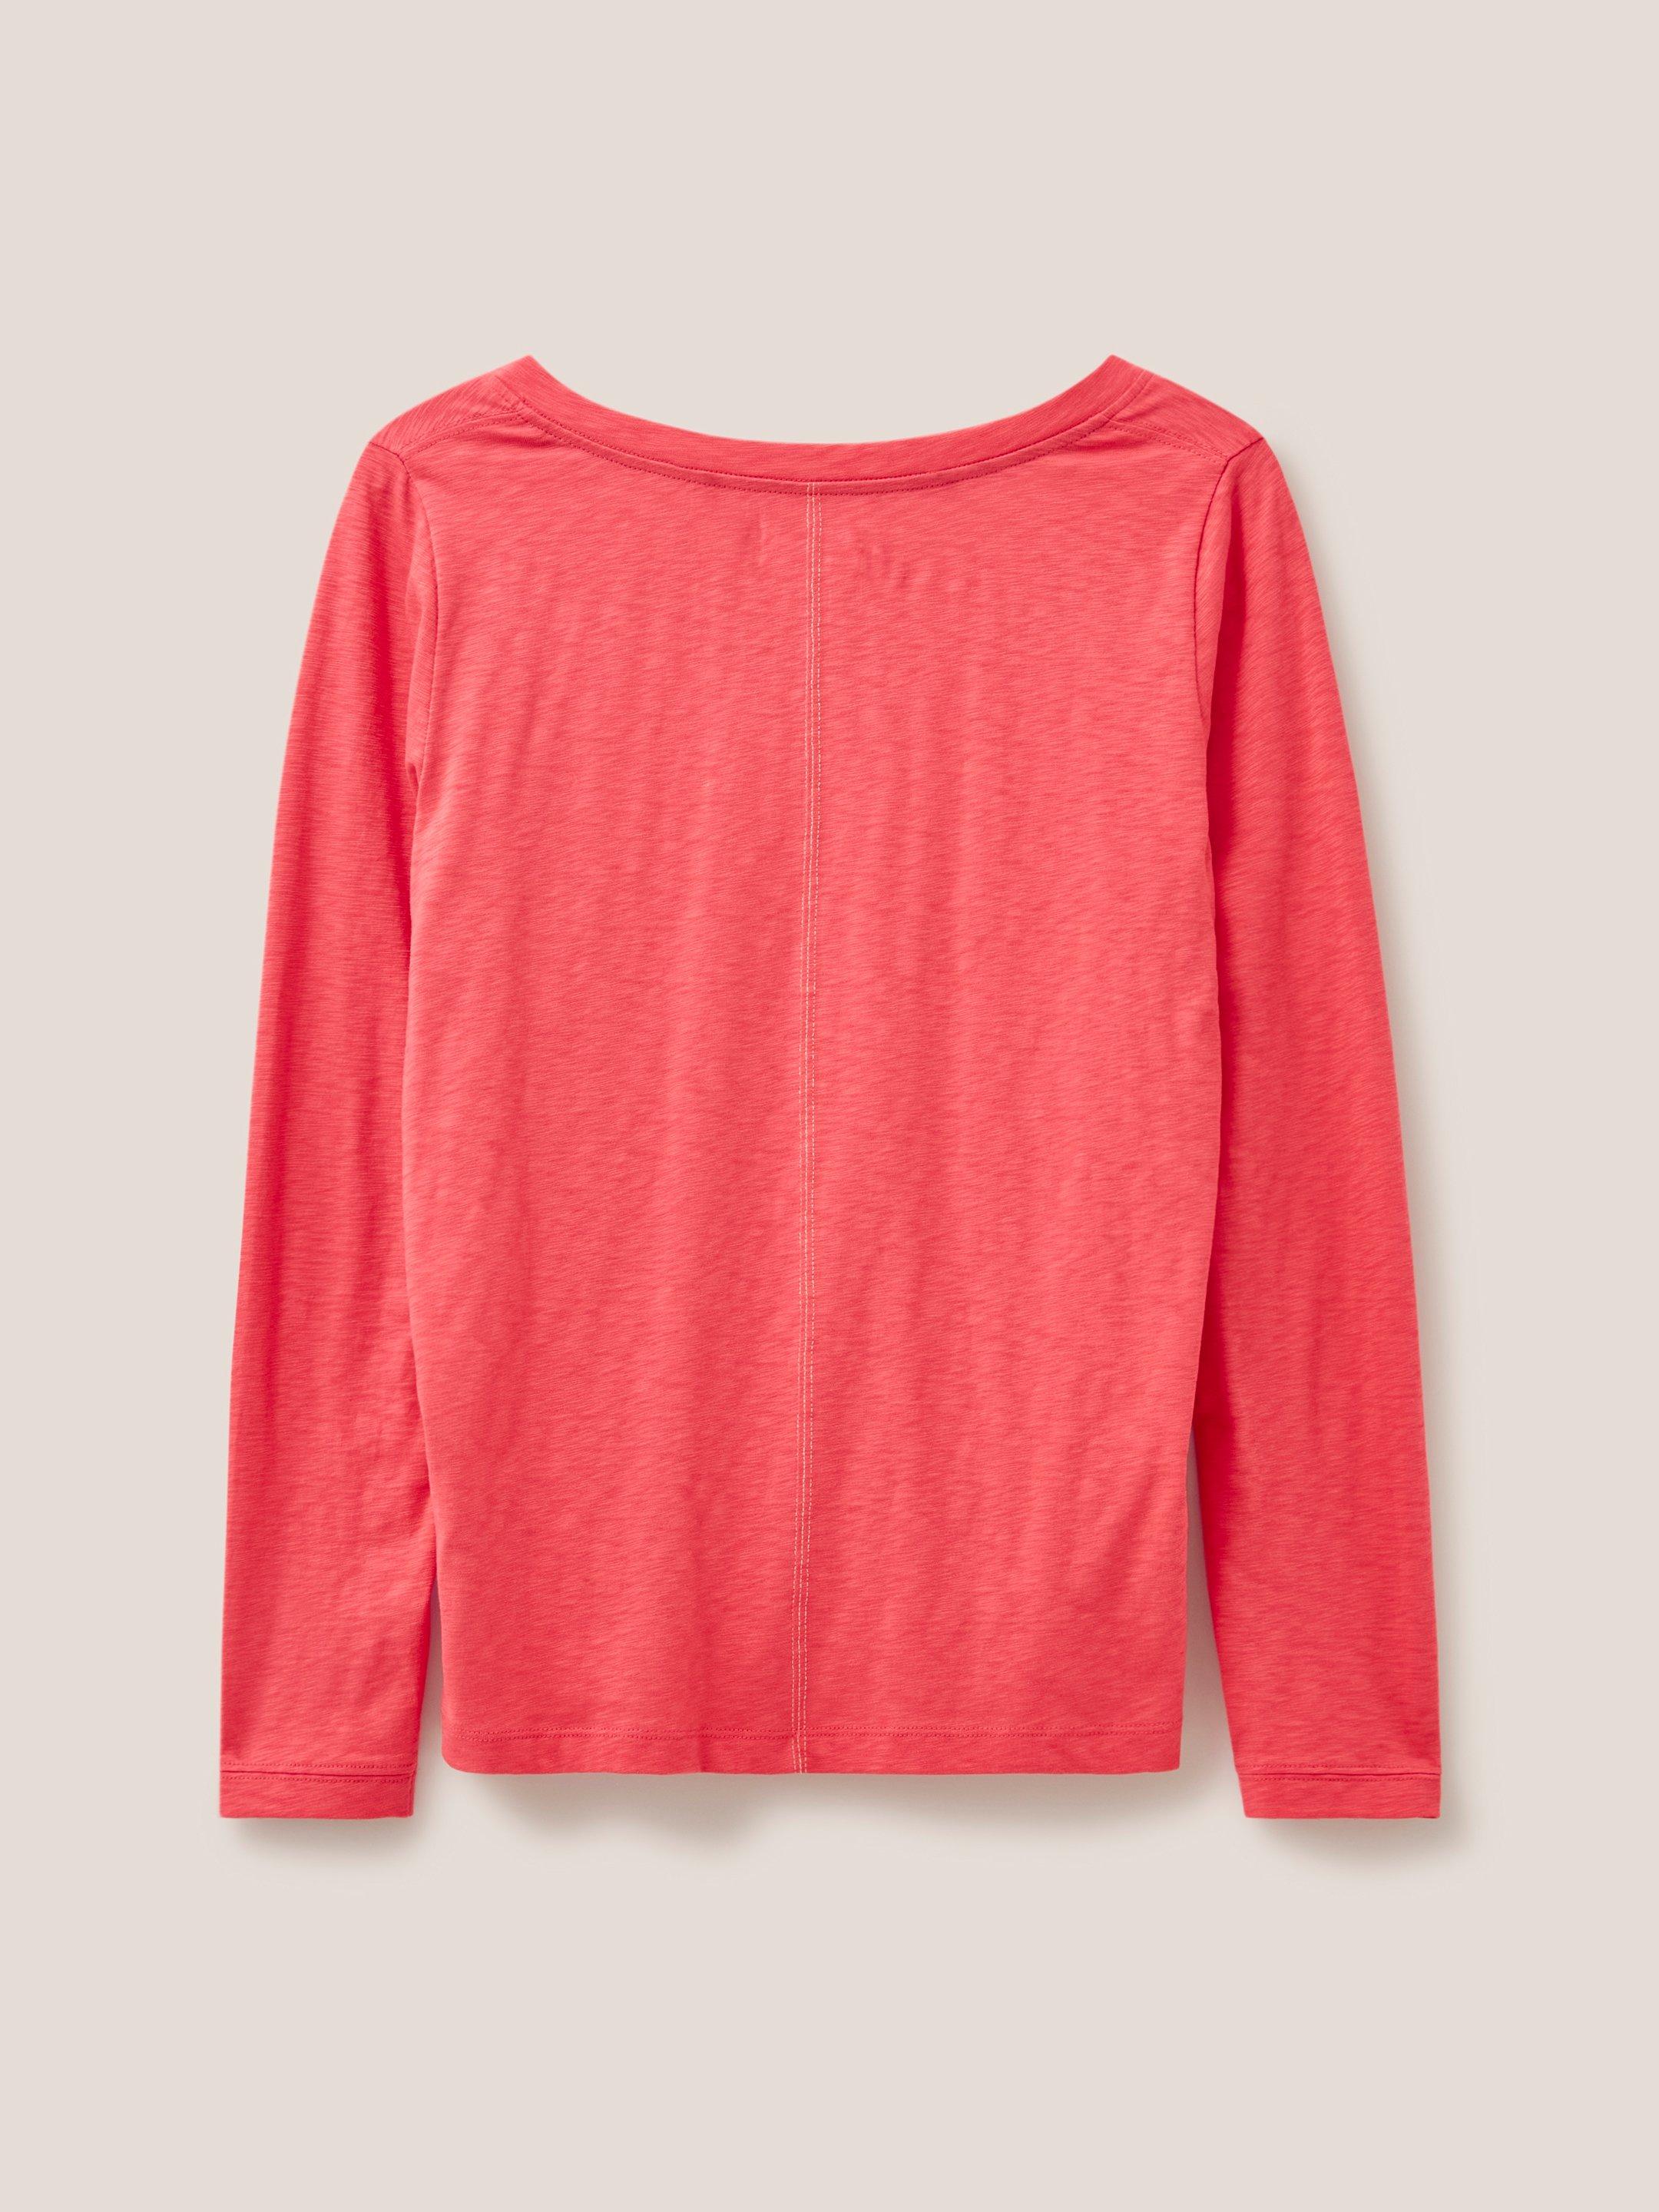 Nelly Long Sleeve T-Shirt in BRT PINK - FLAT BACK